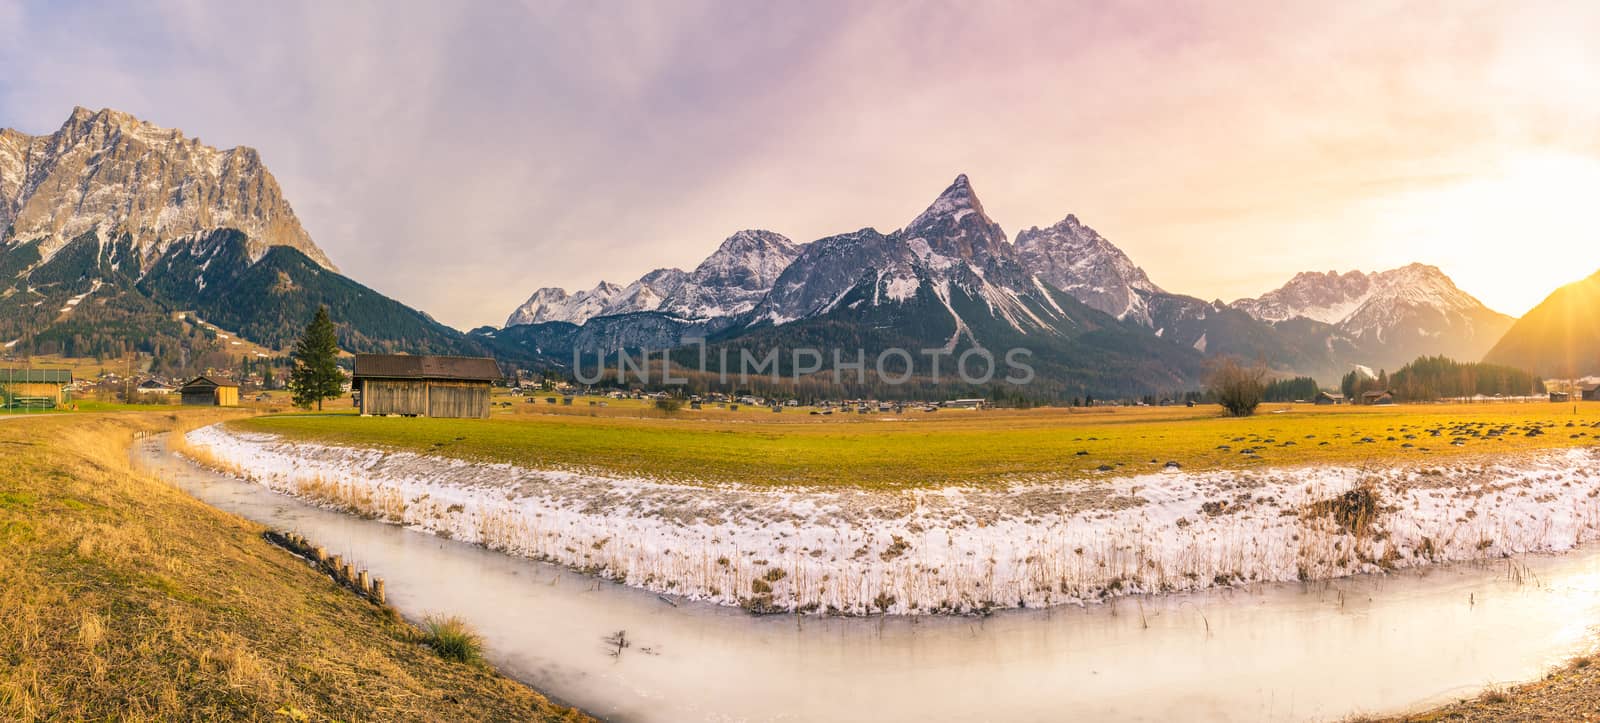 Beginning of the winter  in the Austrian Alps mountains, with a frozen river, snow on the dried grass, a small village and a bright afternoon sun.